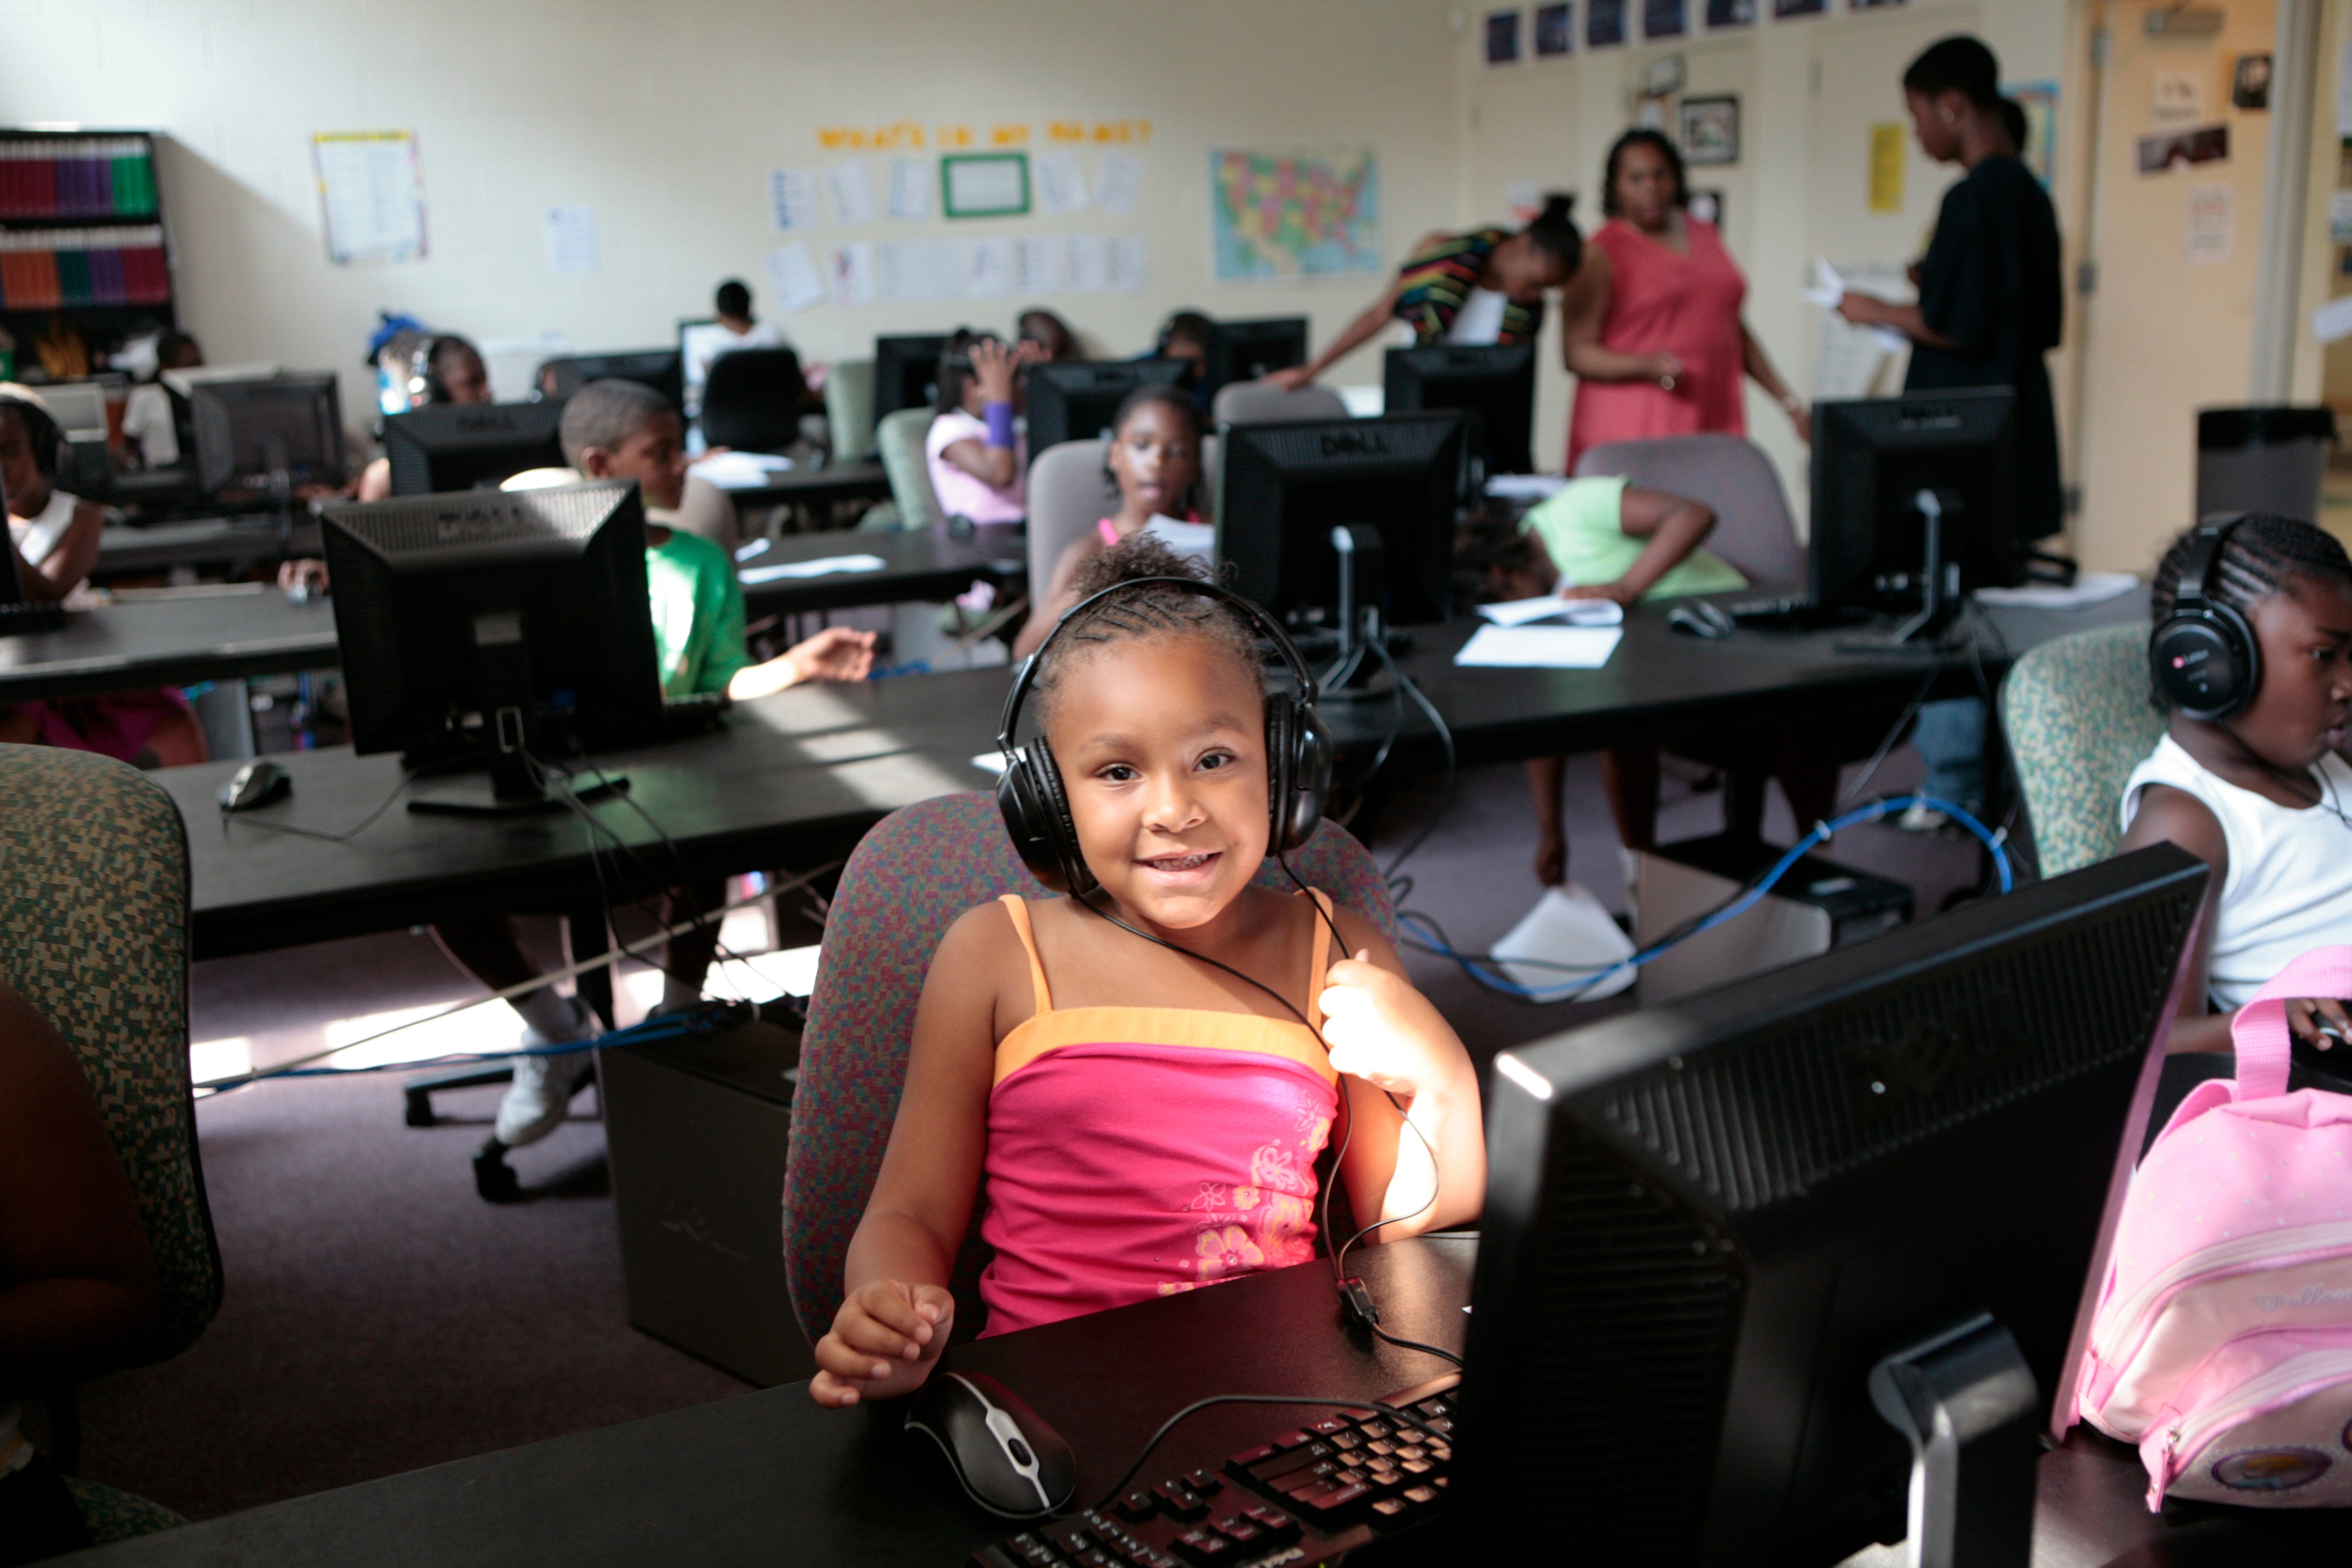 A girl wearing headphones in front of the computer smiles at the camera.